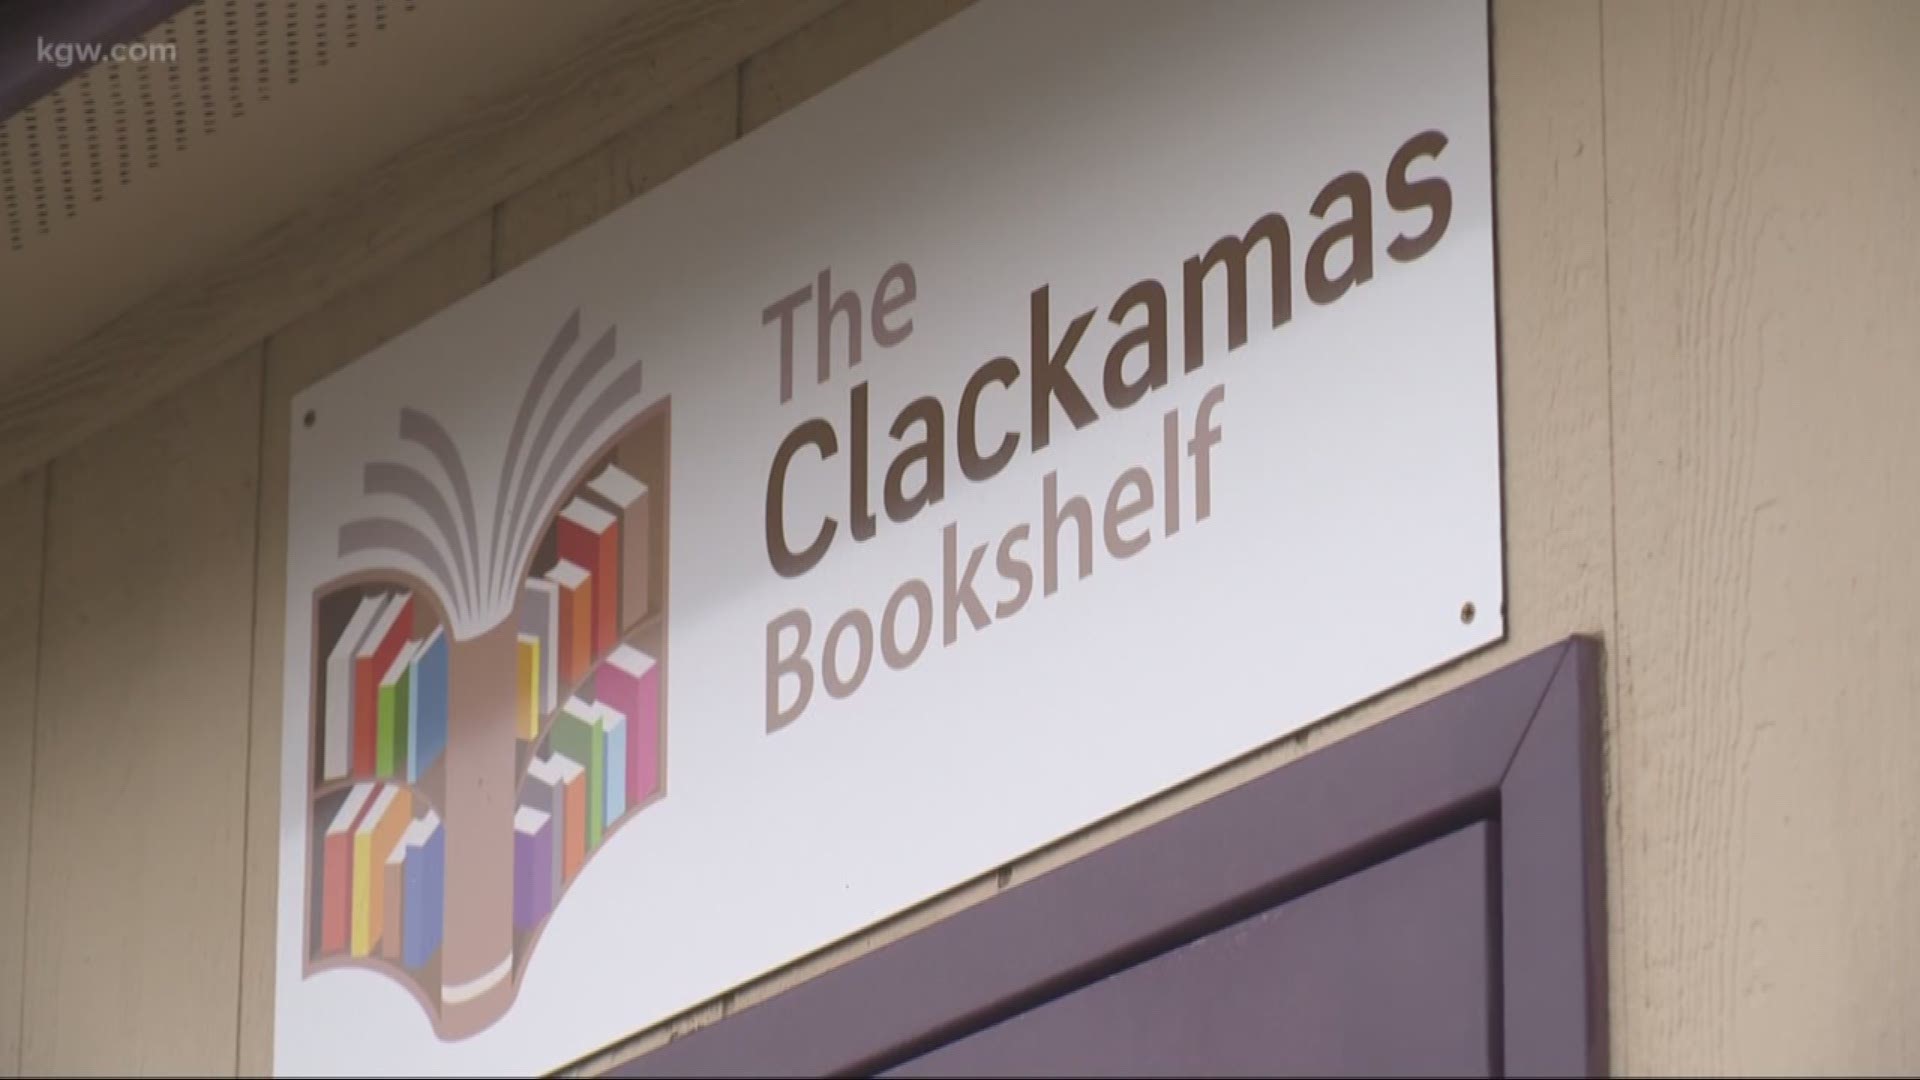 A volunteer book bank in Clackamas County is about to hit a milestone.